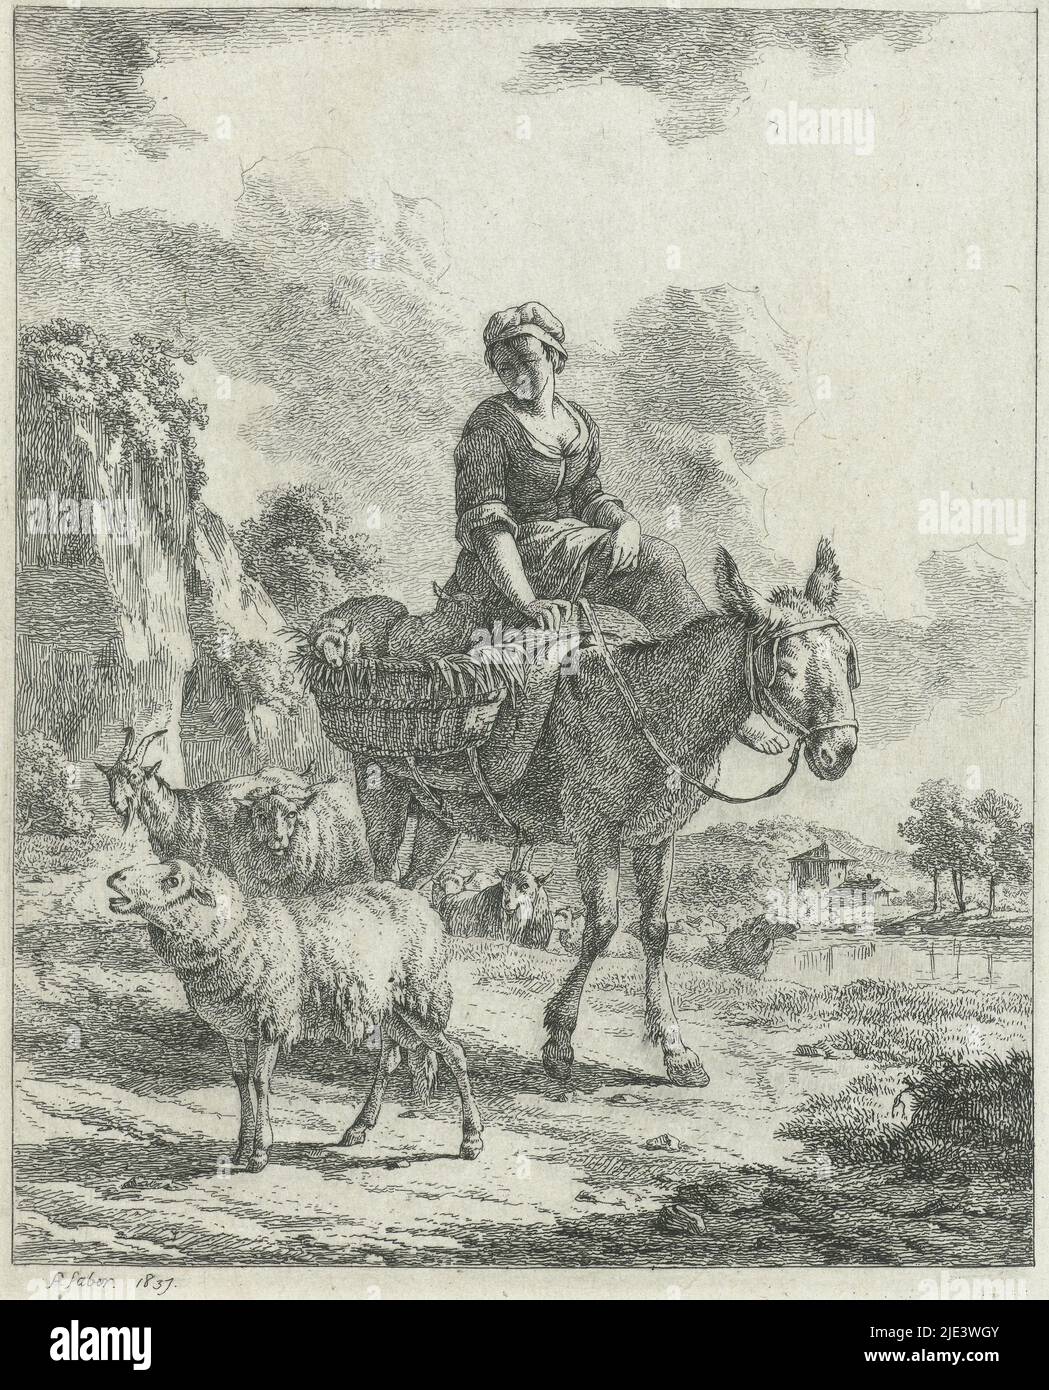 Shepherdess sitting on donkey amidst flock, Frédéric Théodore Faber, 1837, print maker: Frédéric Théodore Faber, (mentioned on object), Brussels, 1837 Stock Photo